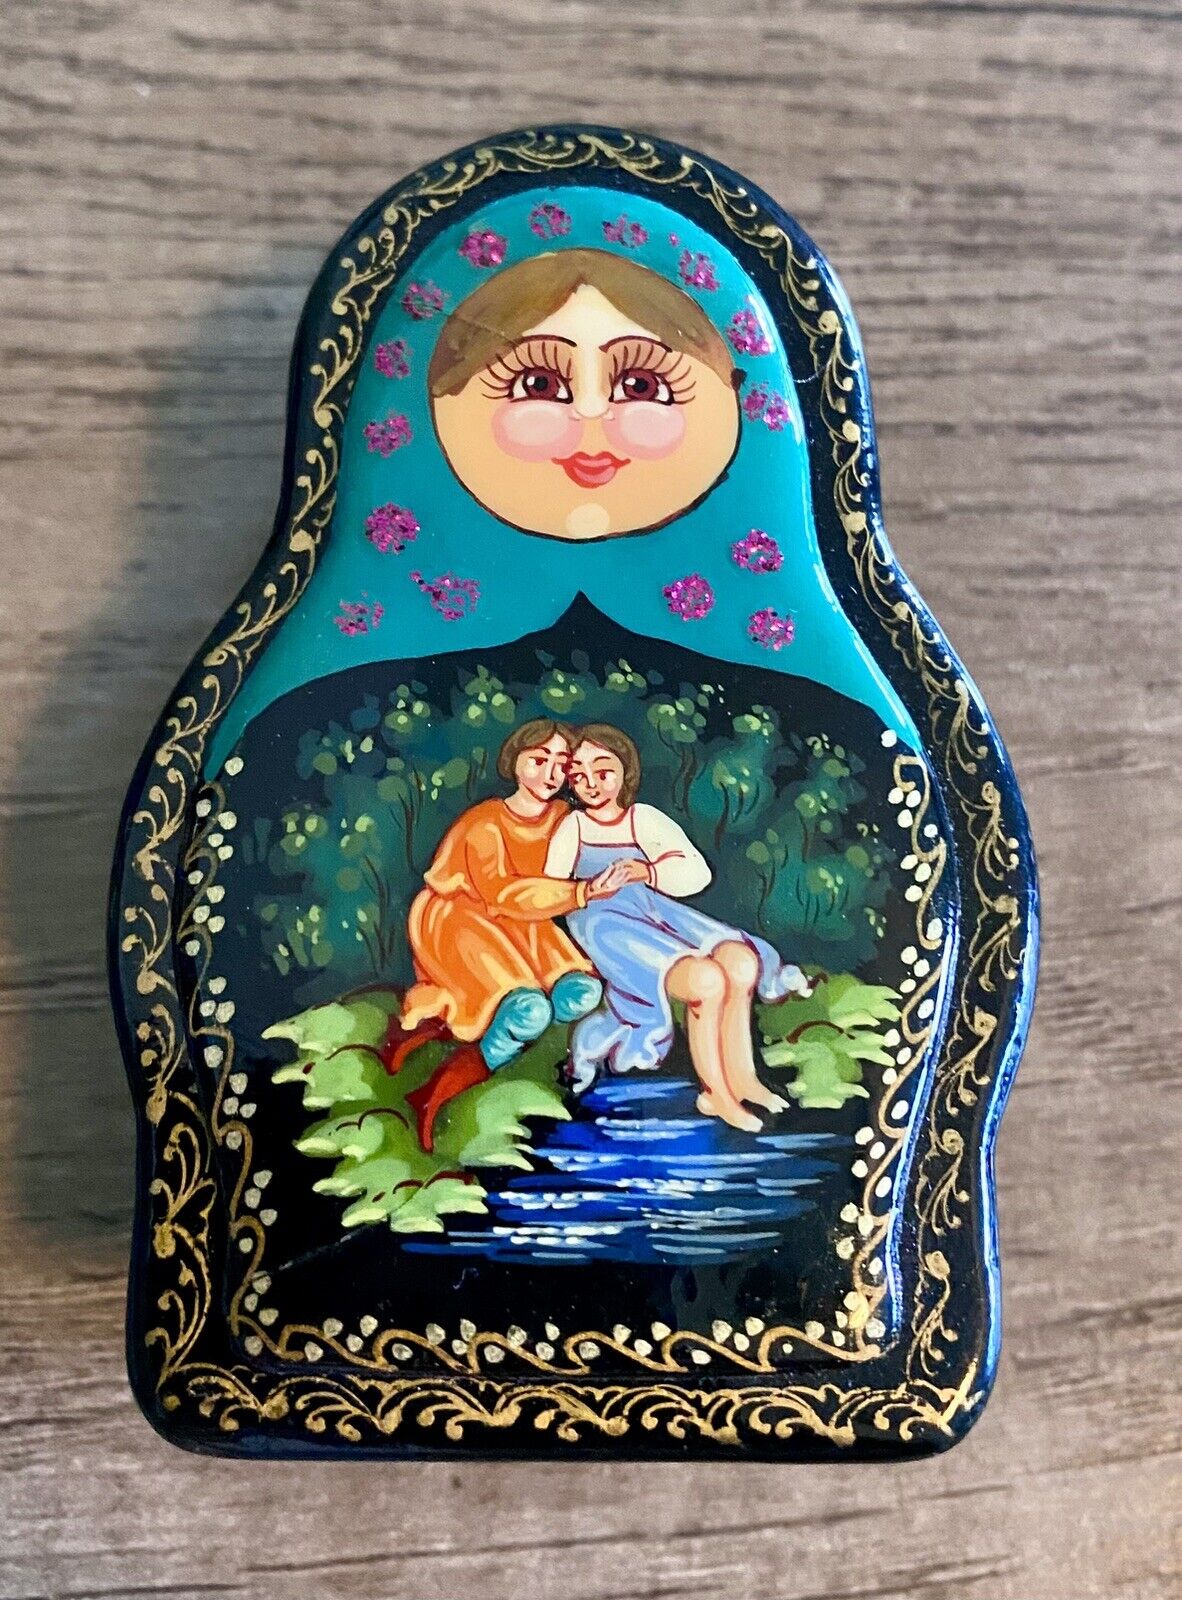 Russian Hand Painted Lacquer Box, Russian Art, Loving Couple, Hinged Trinket Box